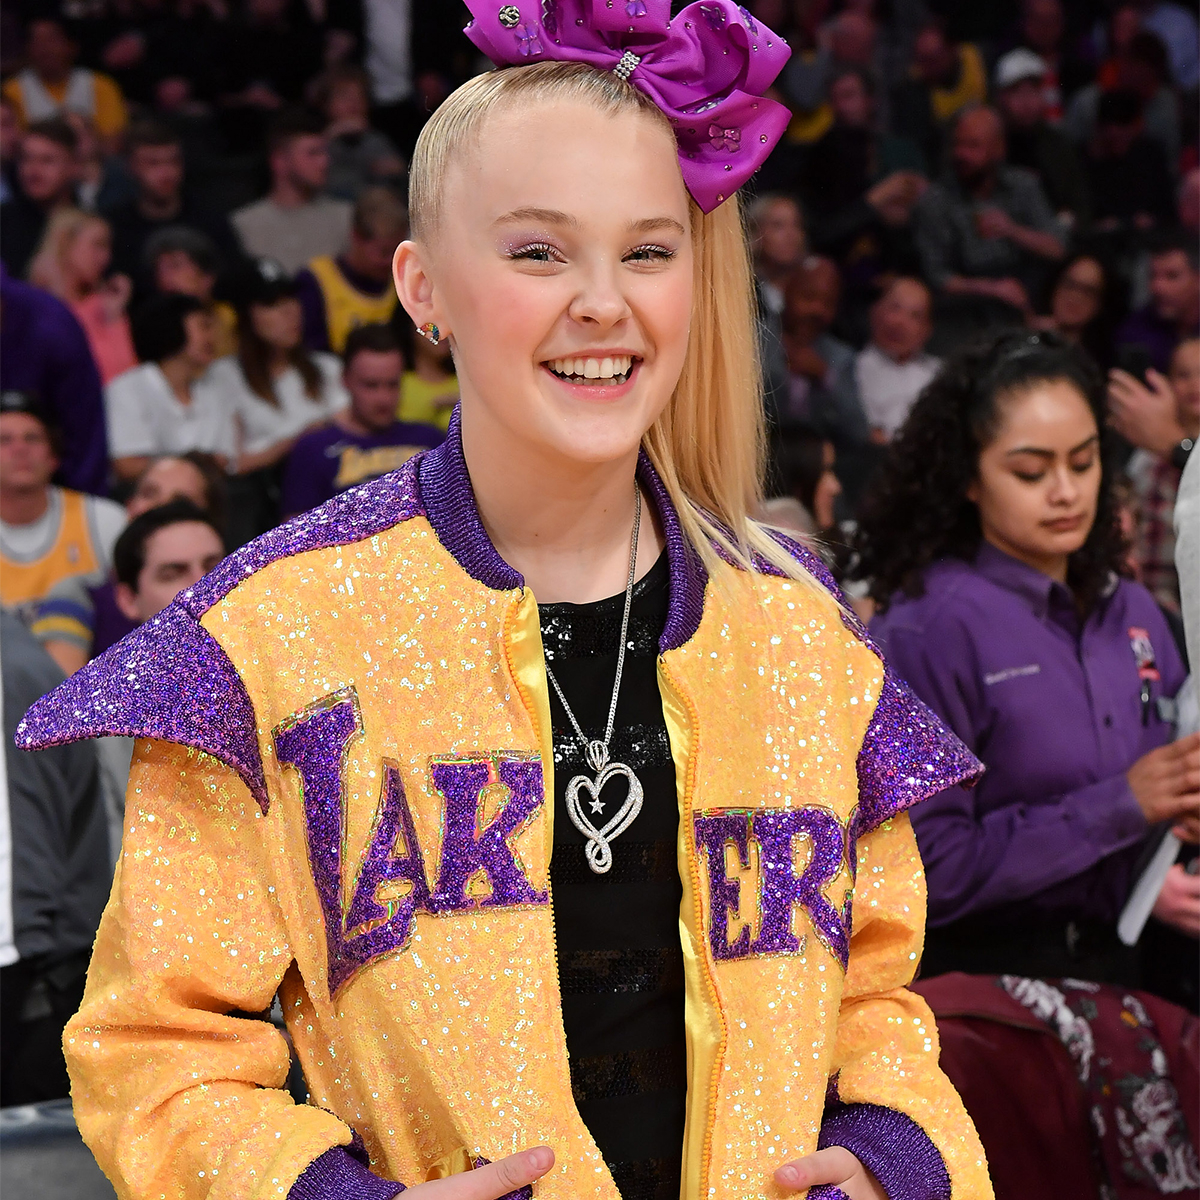 Jojo Siwa says she is ‘happy’ in a sincere video about the arrival